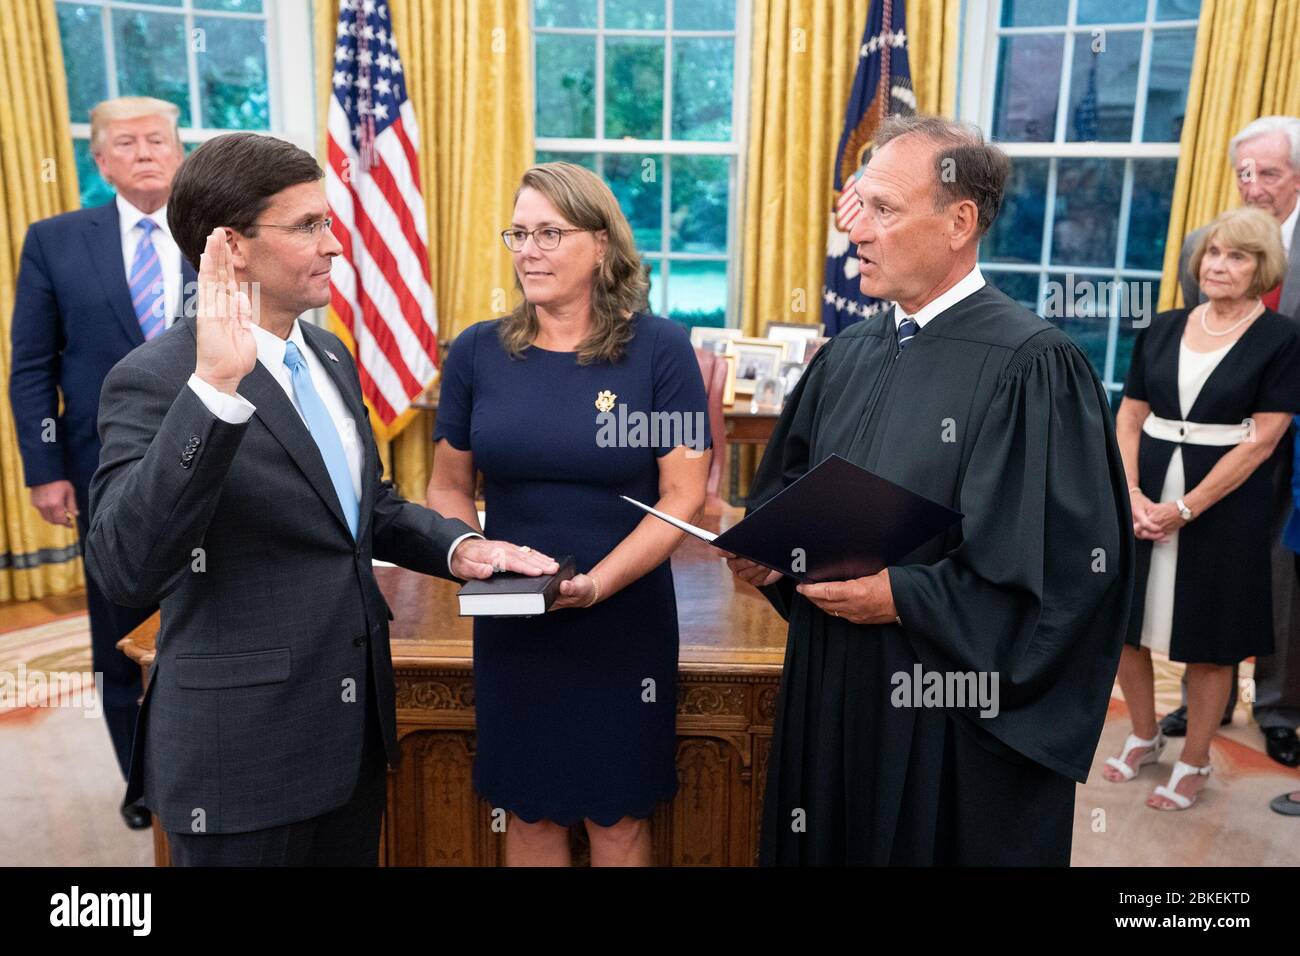 President Donald J. Trump watches as U.S. Supreme Court Associate Justice Samuel Alito swears-in new Secretary of Defense Mark Esper Tuesday, July 23, 2019, in the Oval Office of the White House. Swearing-in Ceremony for Secretary of Defense Mark Esper Stock Photo